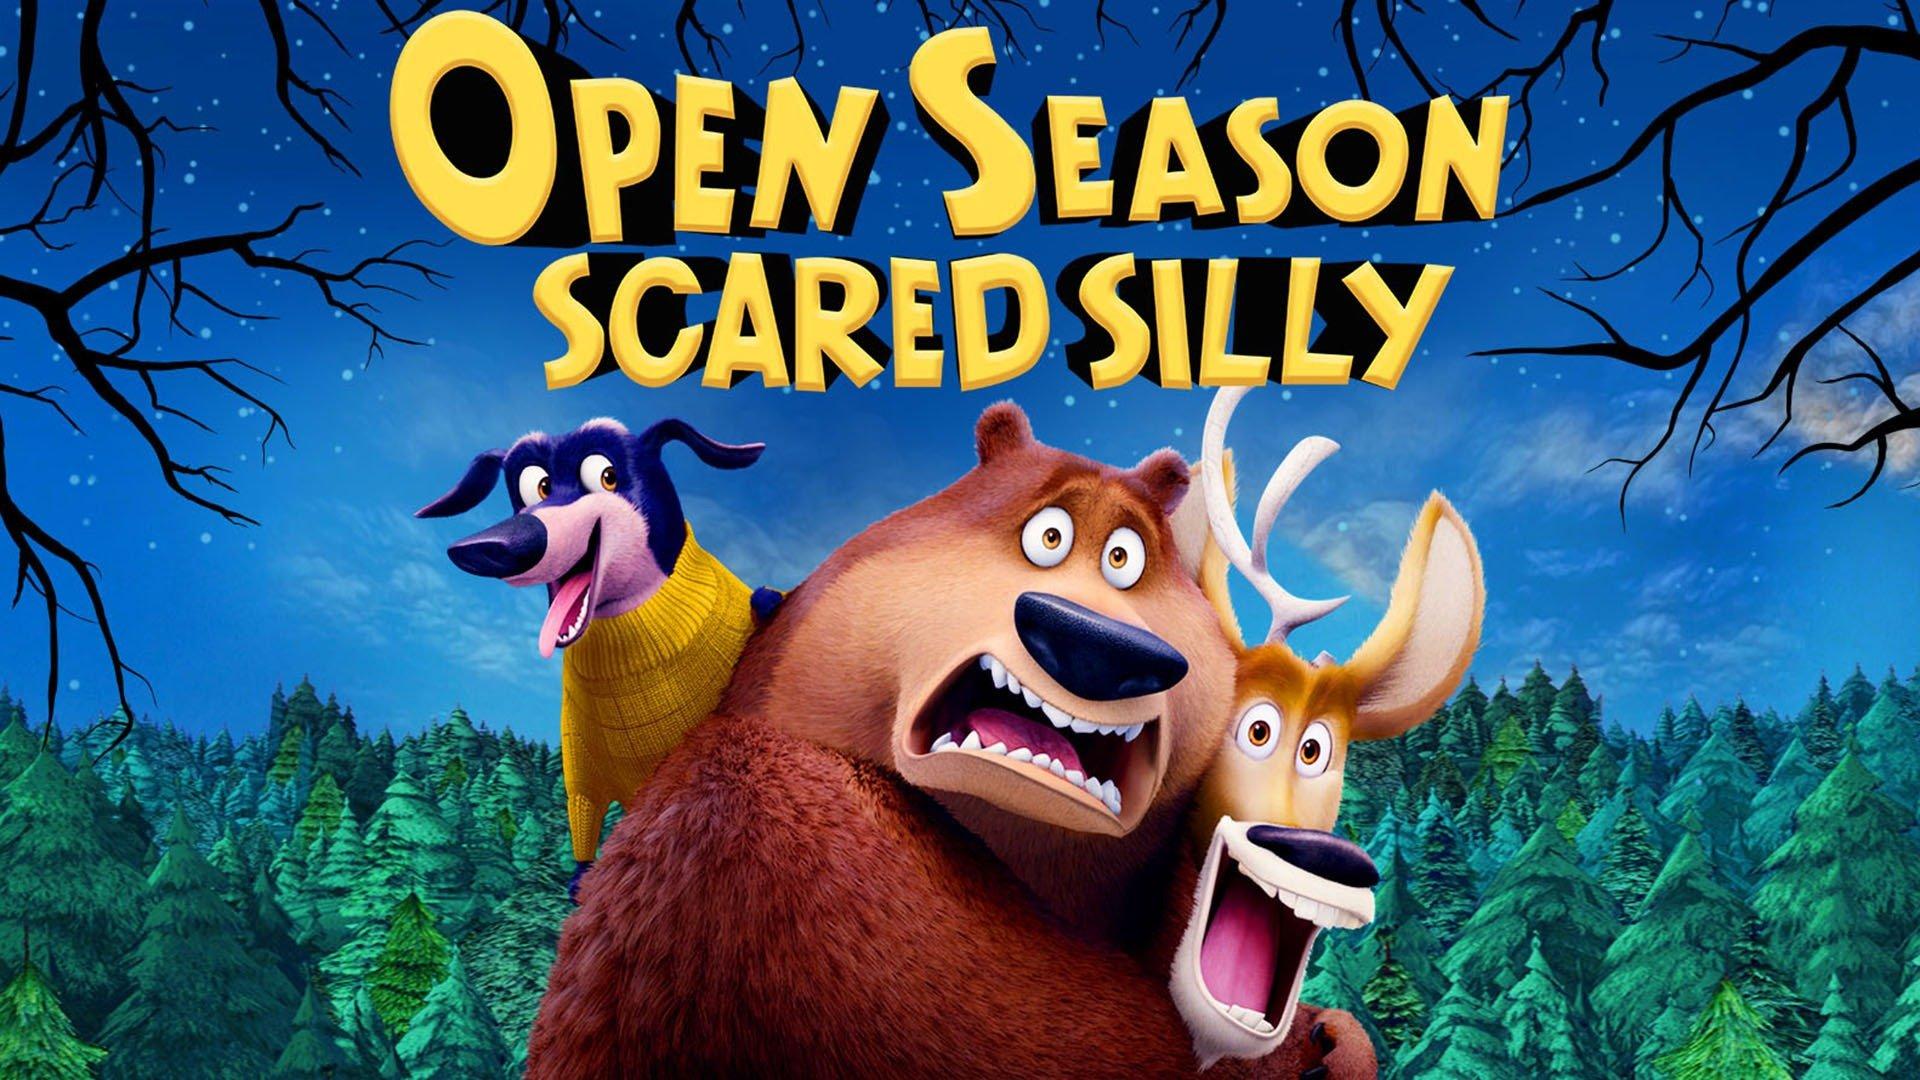 Watch Open Season: Scared Silly Online with Lightbox from $4.99